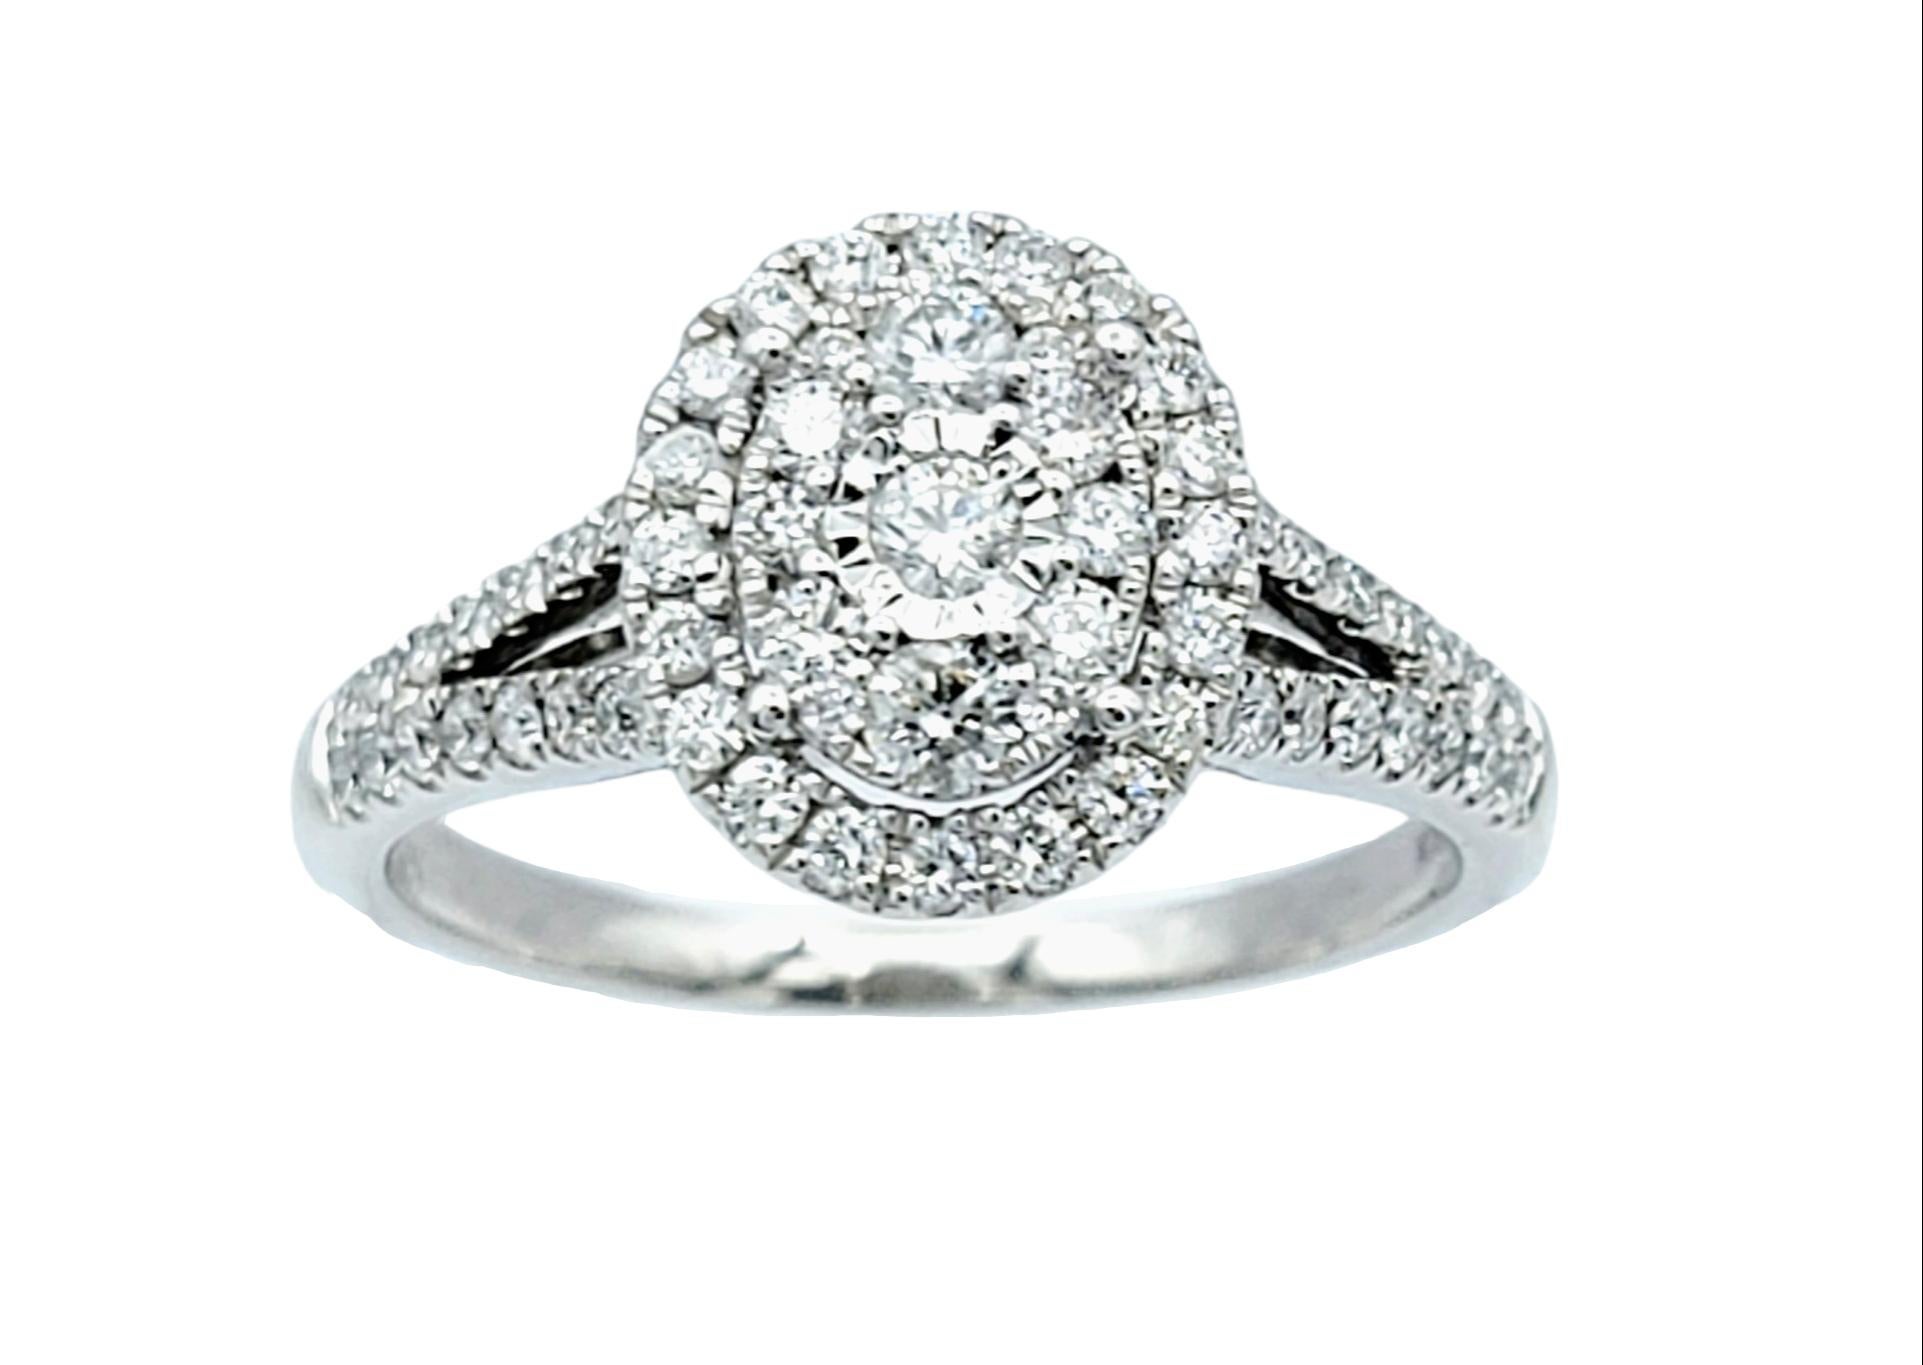 Ring size: 9.75

Introducing a dazzling double pave halo diamond engagement ring in lustrous white gold. This exquisite piece of jewelry exudes romance and luxury, making it the perfect symbol of your everlasting love.

At its heart lies a petite